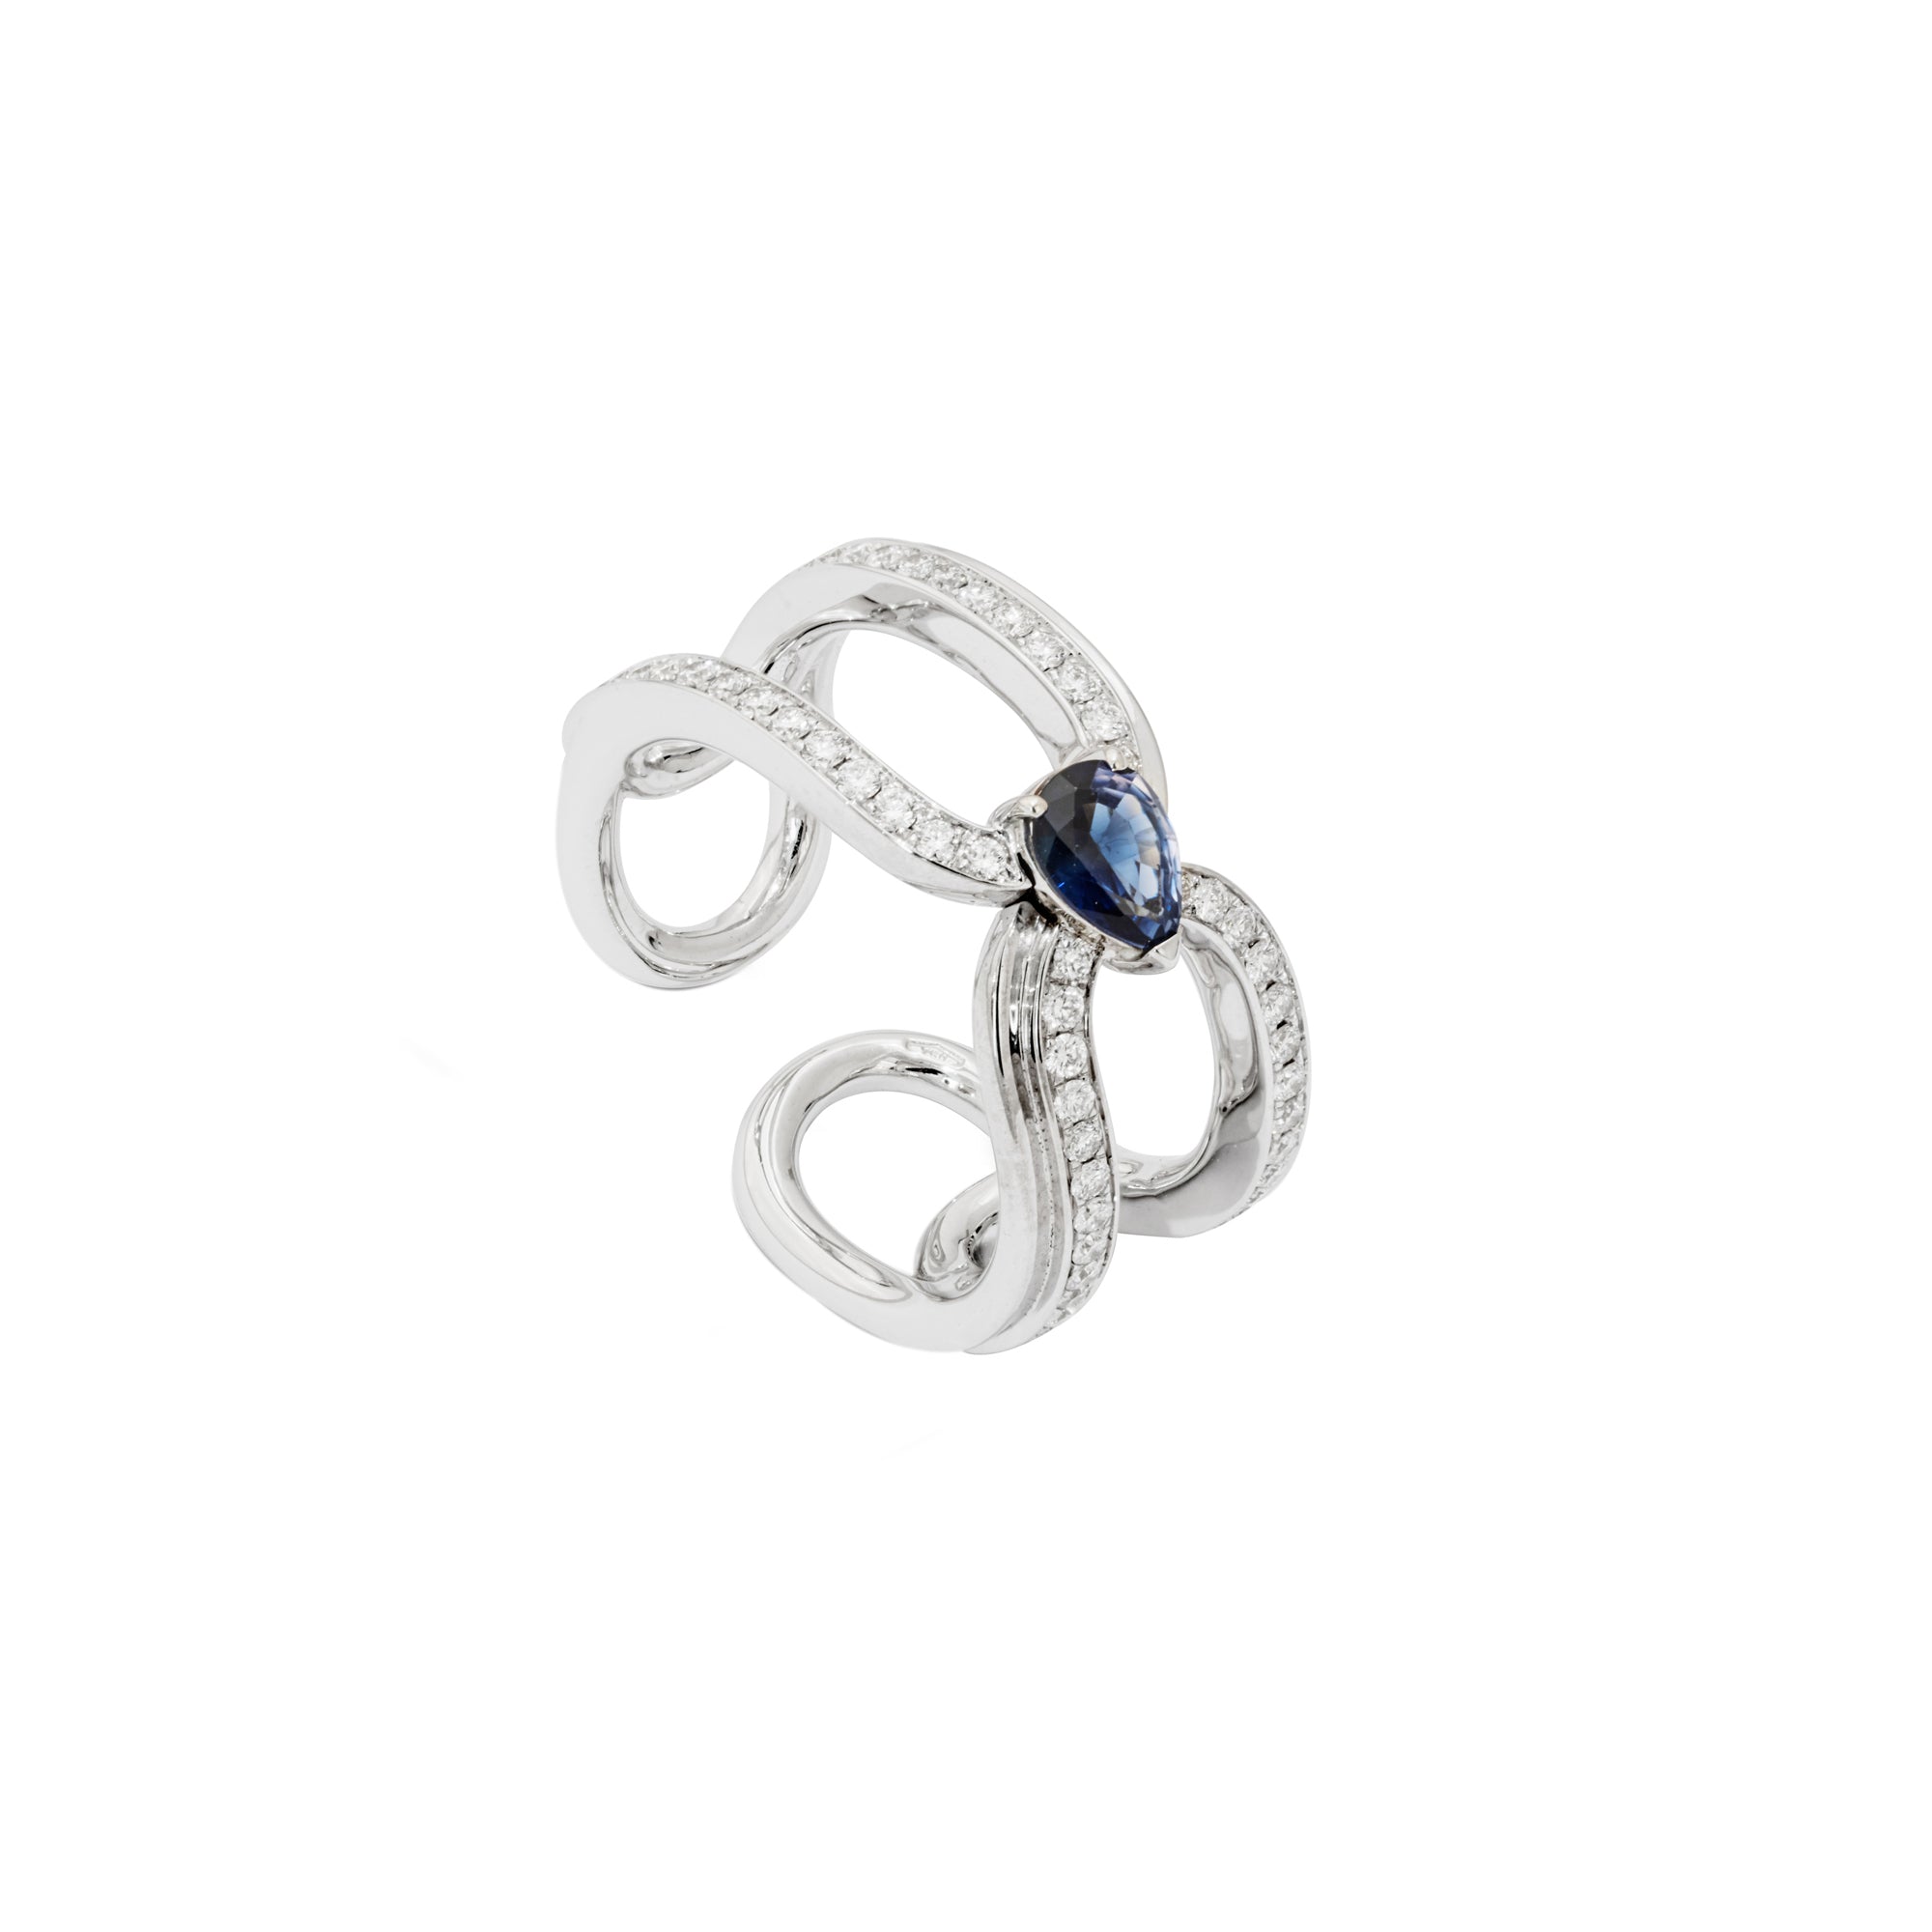 Clip White Gold Ring With Diamonds And Sapphire